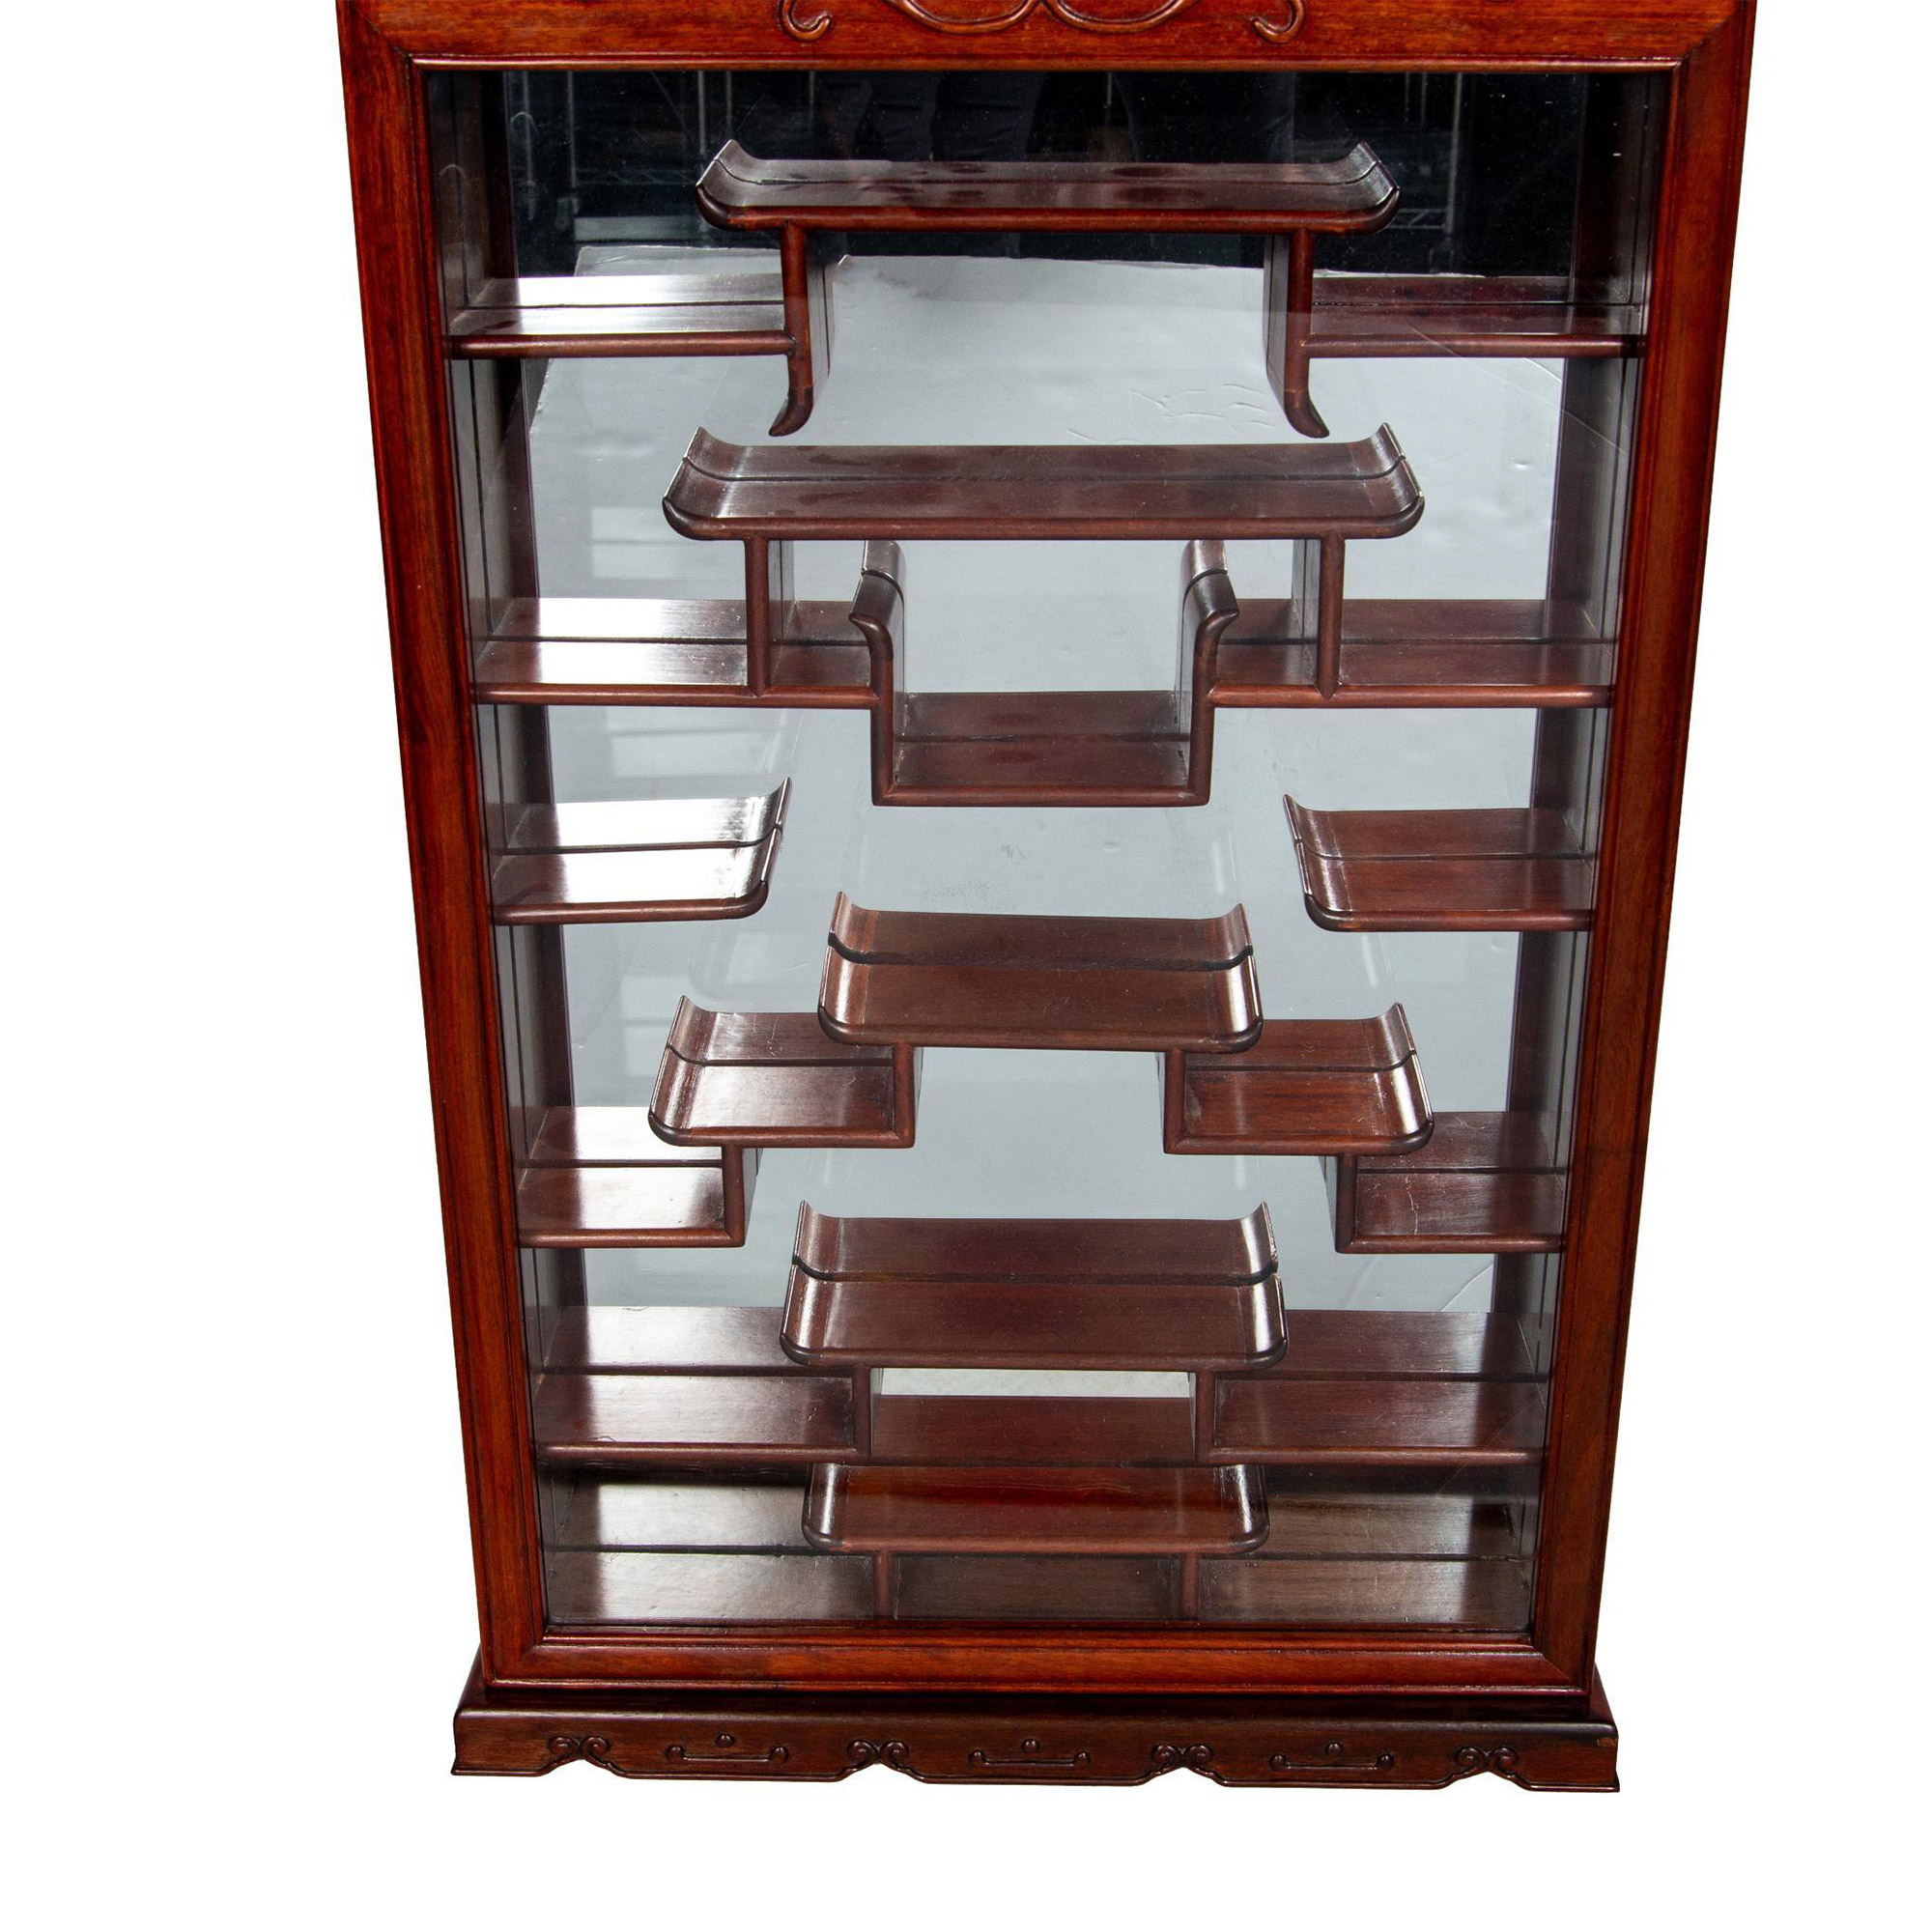 Chinese Hanging Wood Wall Display Case - Image 2 of 5